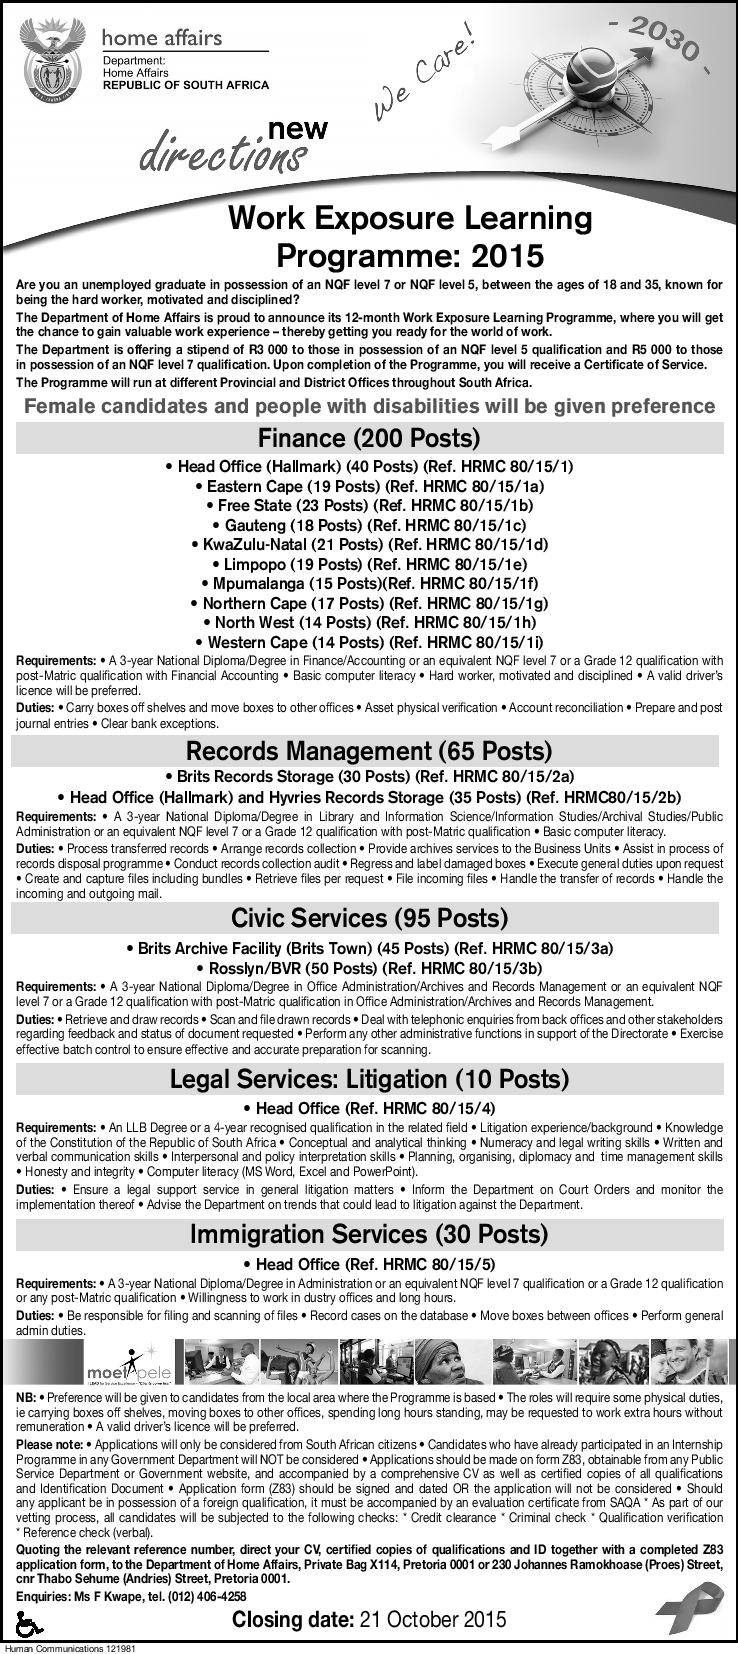 DHA Work Exposure Learning Programme 2015